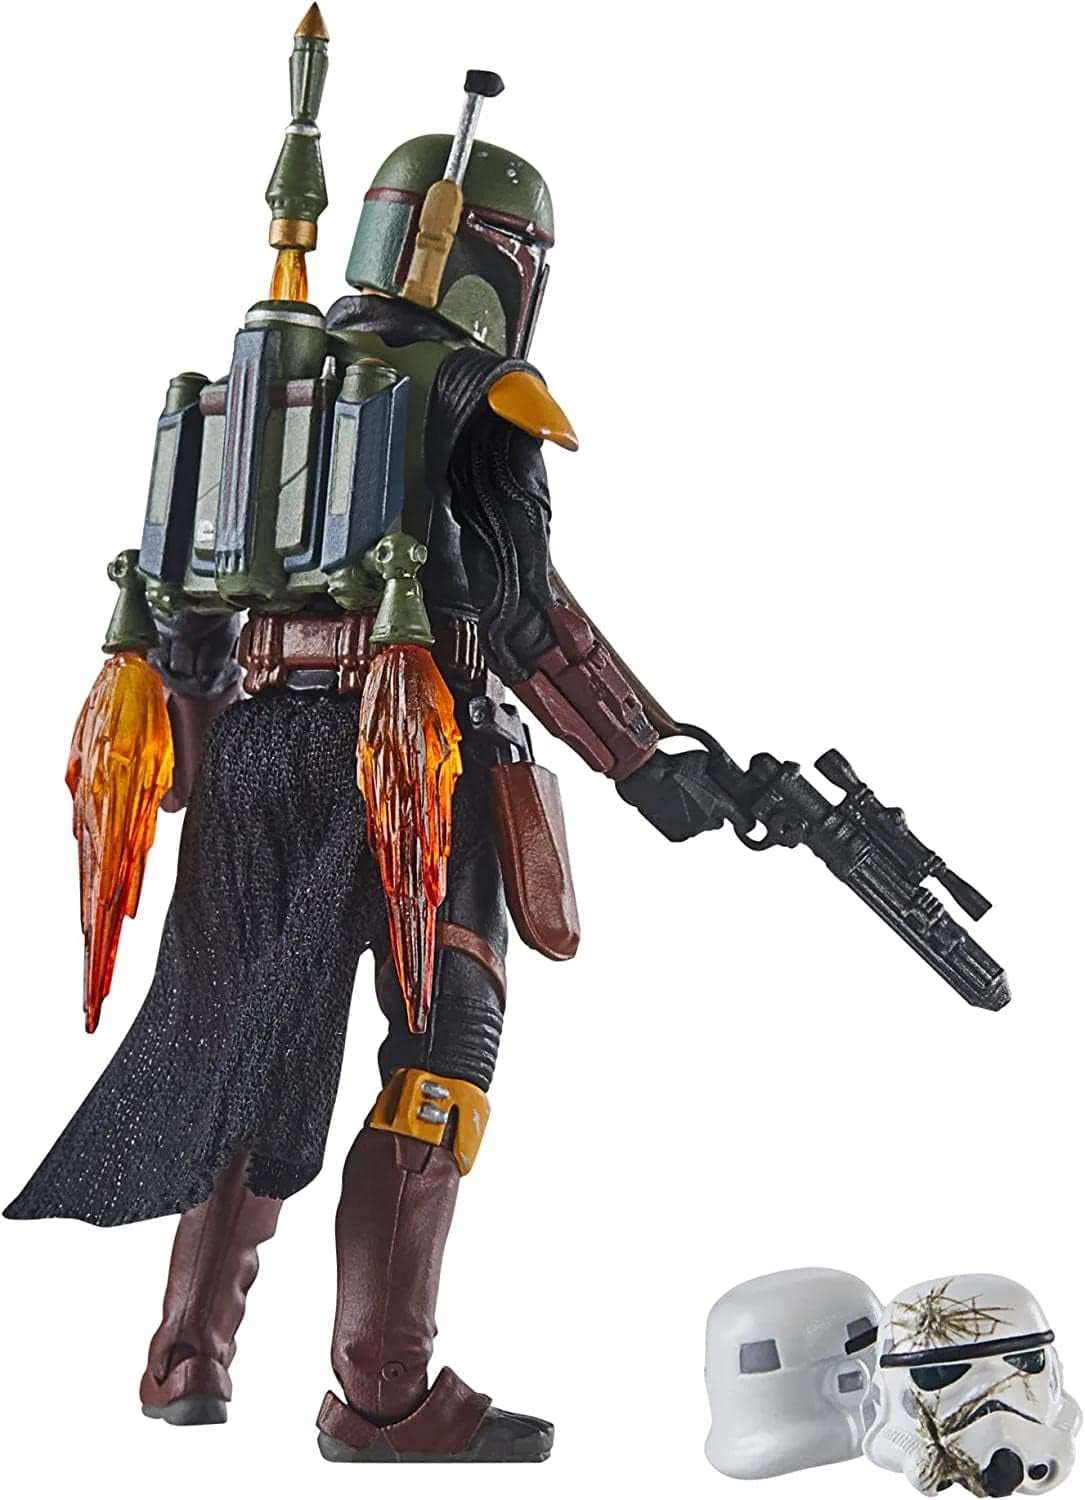 the Vintage Collection Boba Fett (Tatooine) Deluxe Action Figure, 3.75-Inch-Scale the Book of Boba Fett Toy for Kids